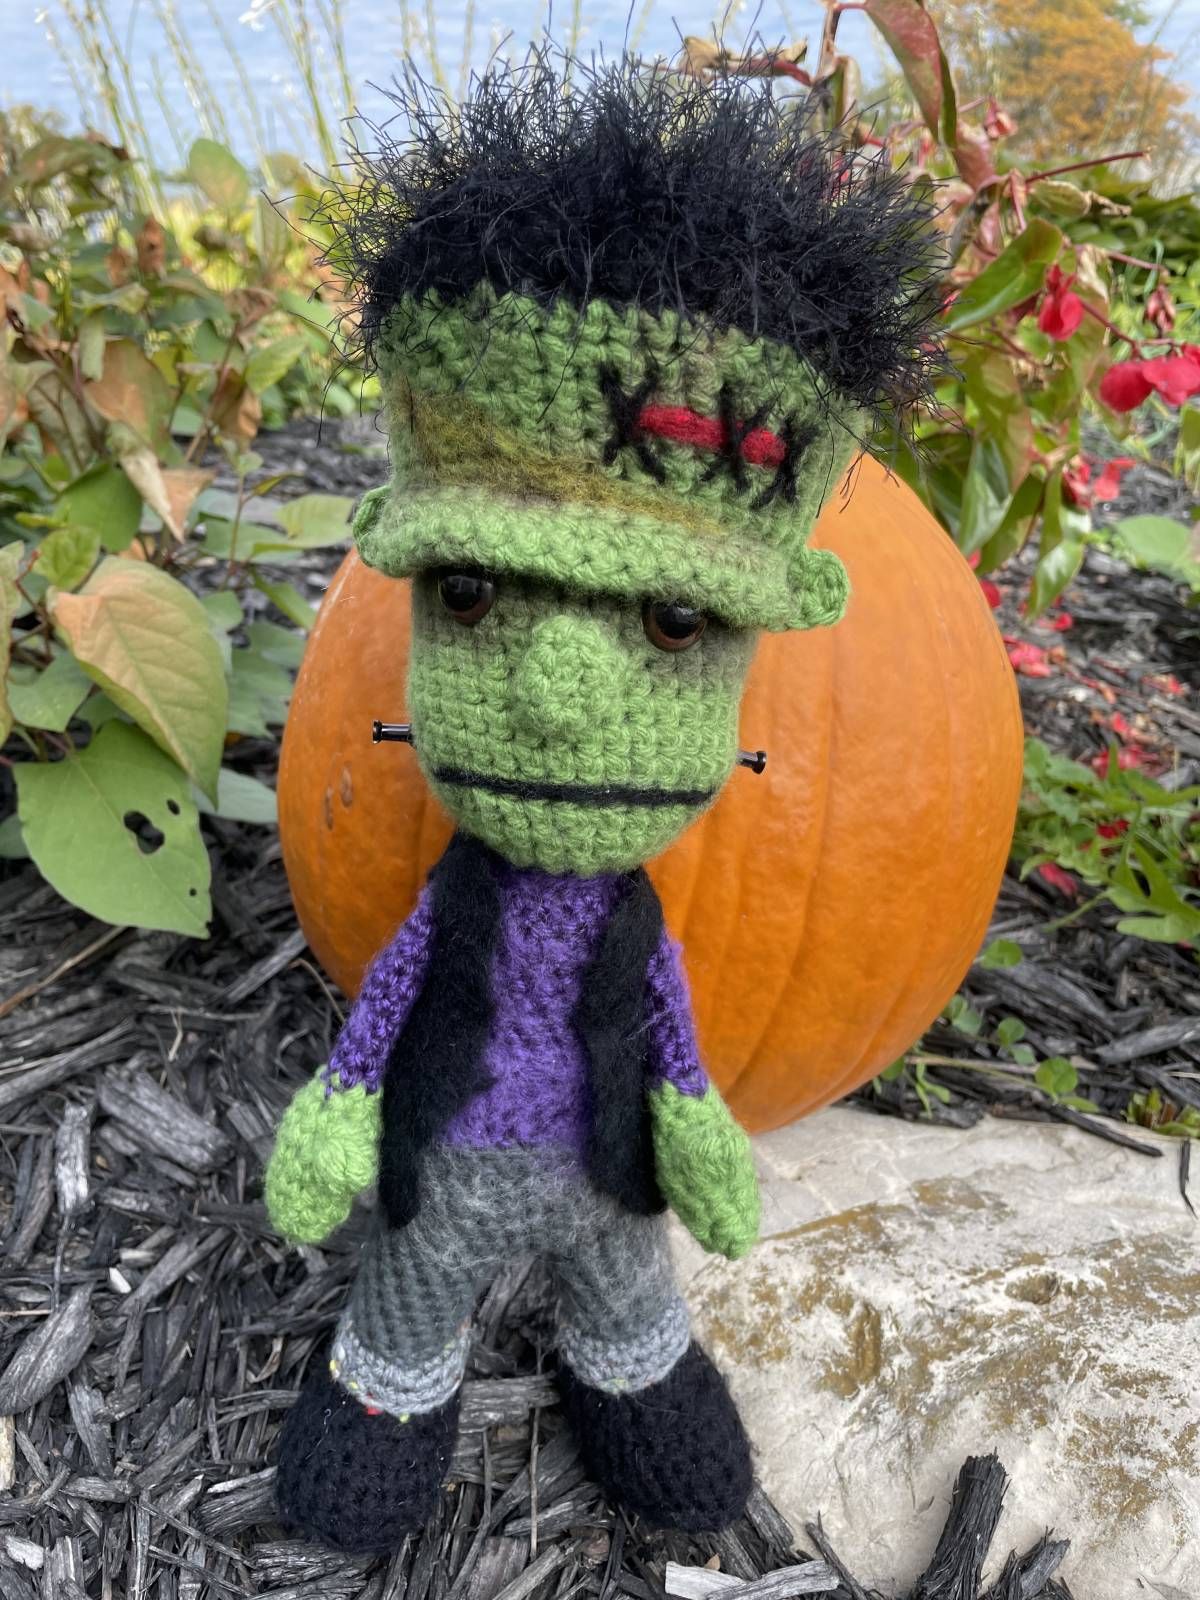 Amigurumi Frankenstein Crochet Doll Pattern by D Defauw for Cottontail and Whiskers